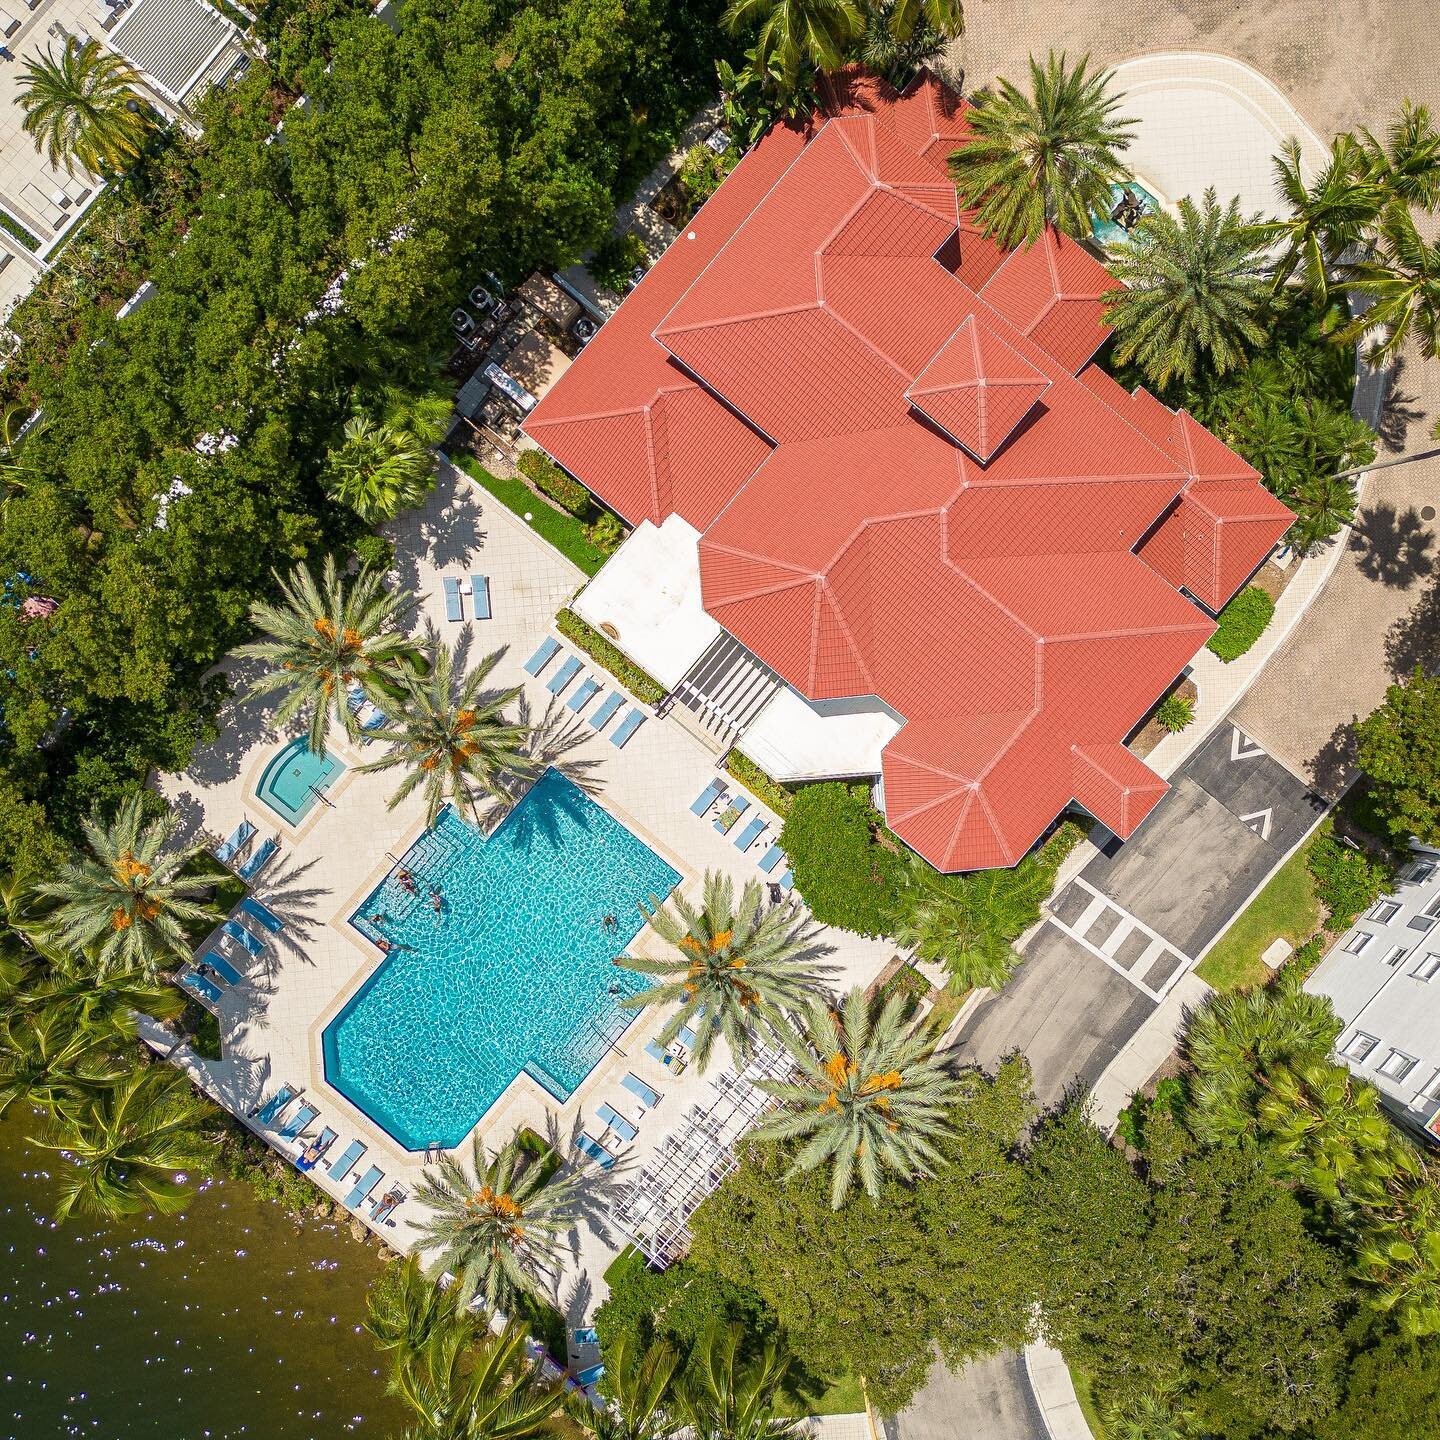 Village by the Bay drone photography. Selling or renting? We have the right photography solution for you!
.
.
.
#villagebythebay #realestate #realtor #aventura #florida #aventurafl #aventuramall #realestatephotography #drone #dronephotography #aerial